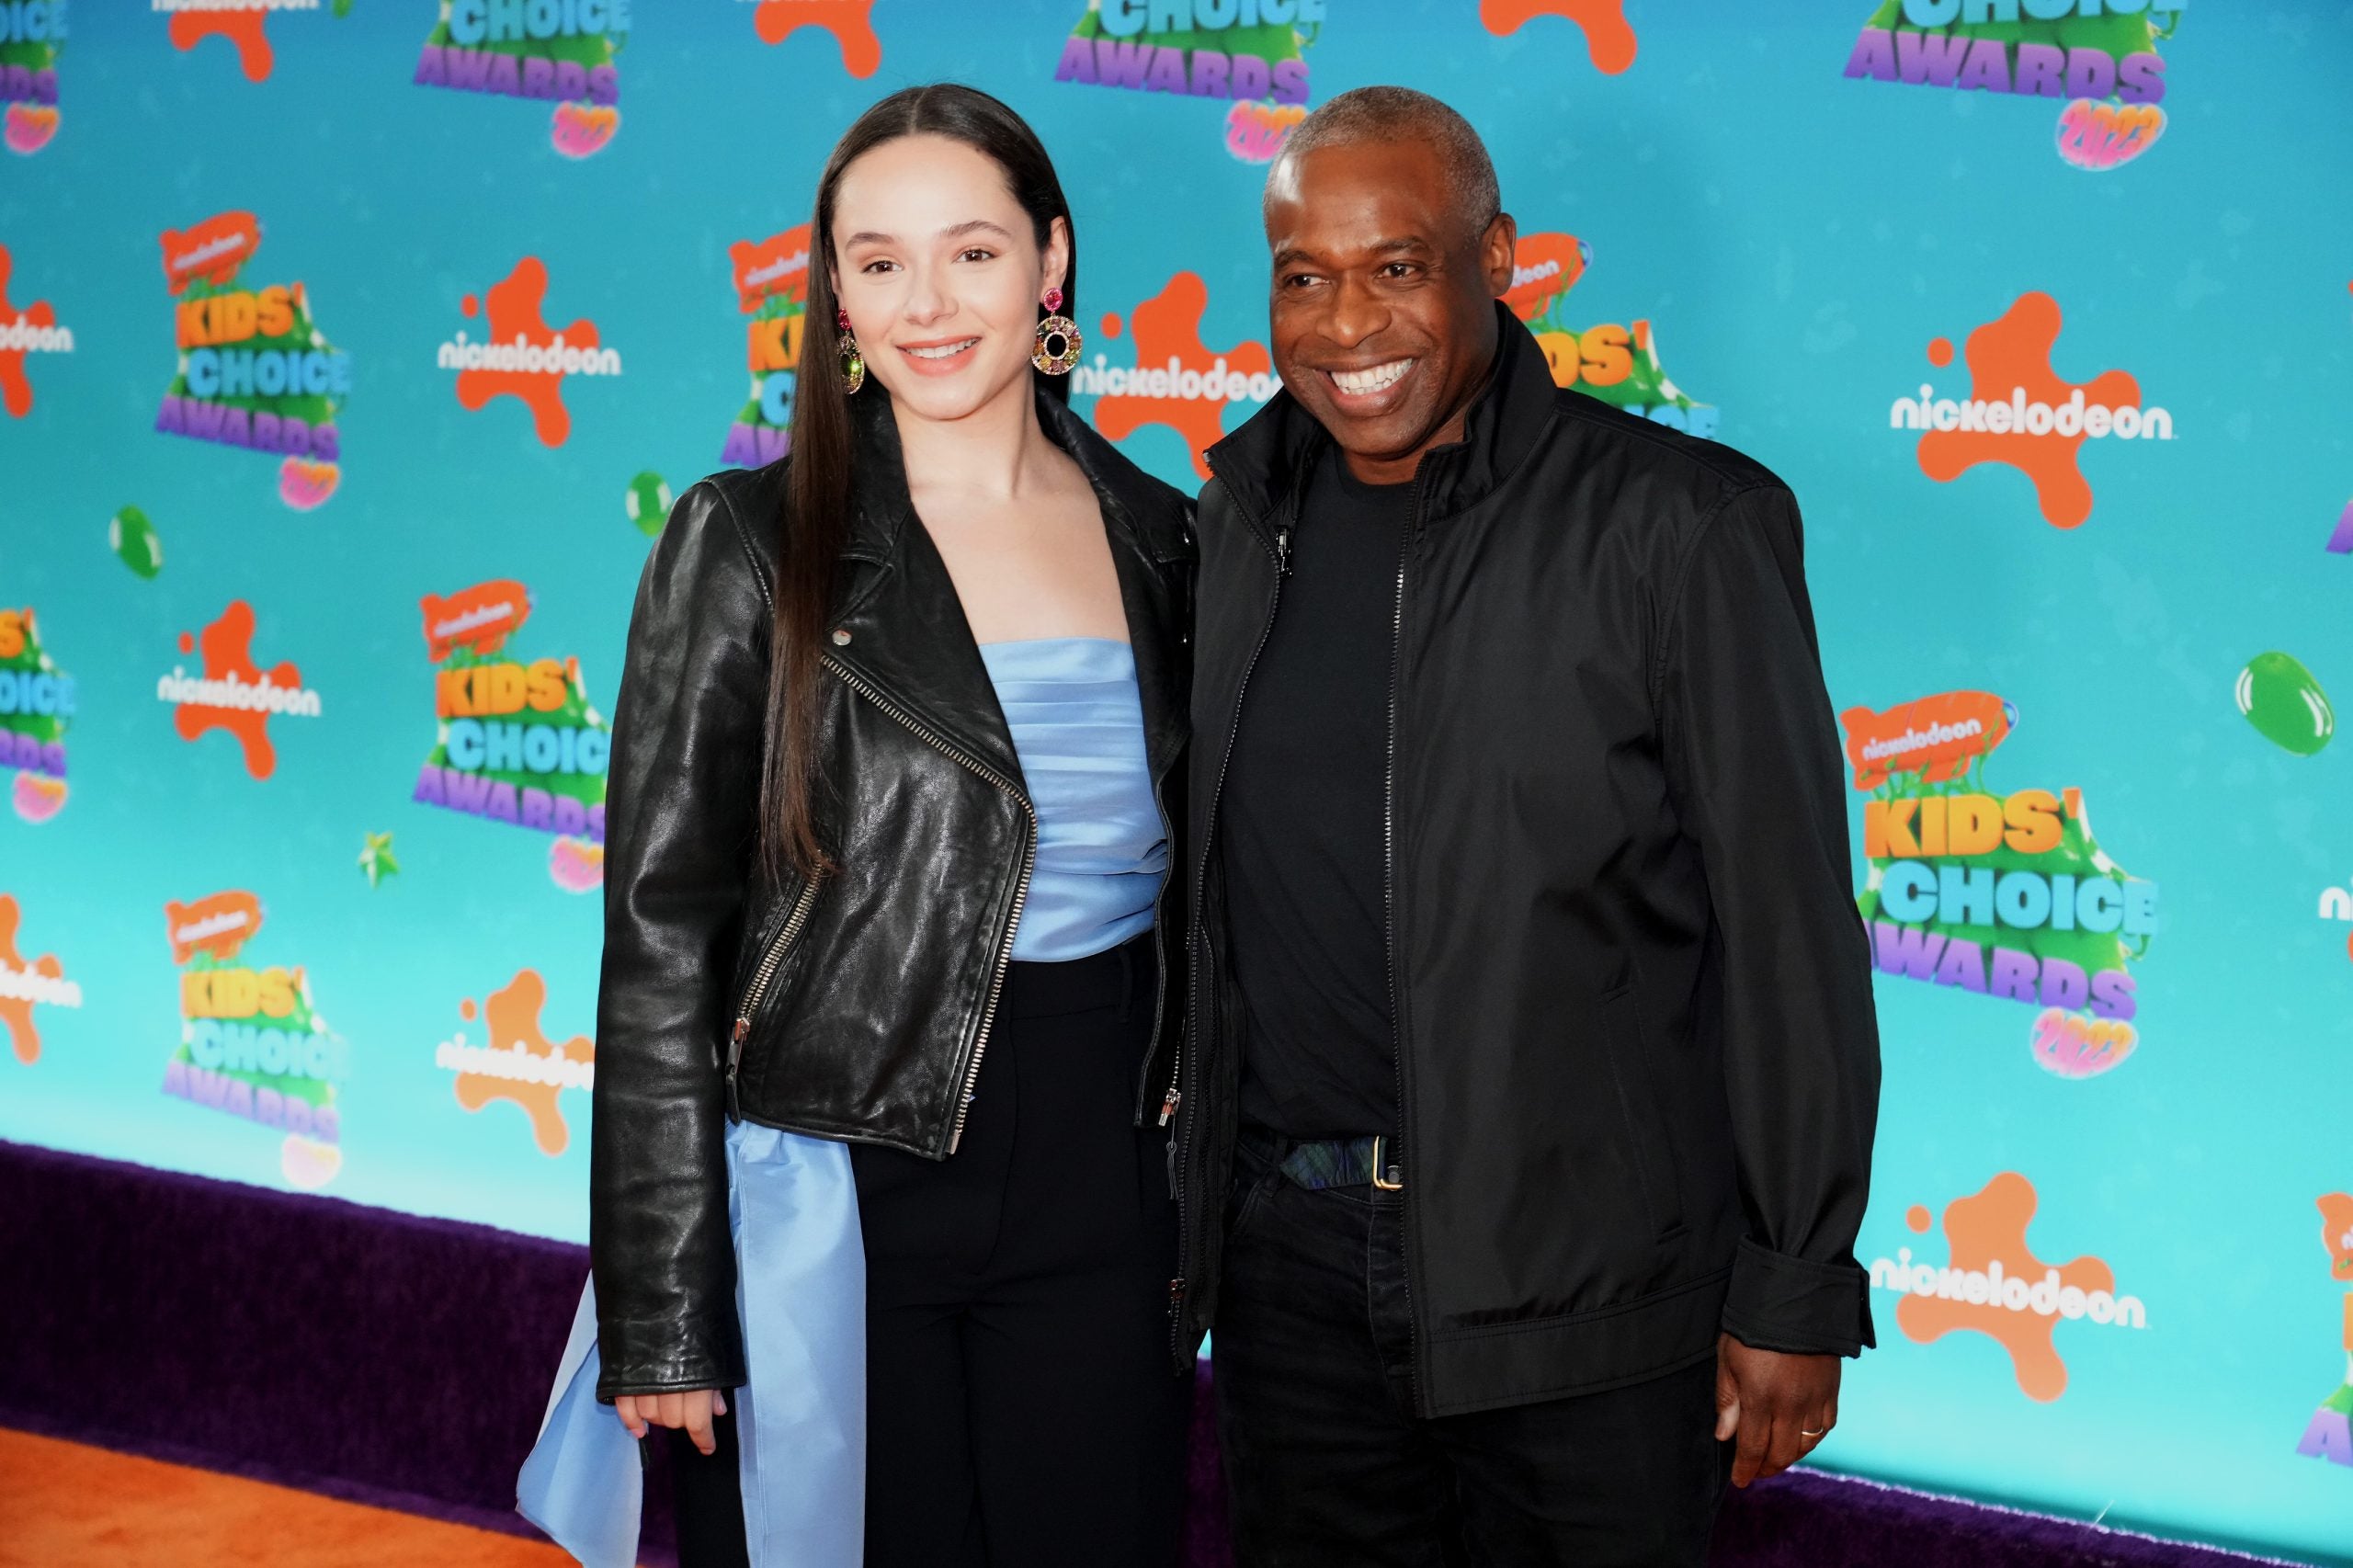 Your Favorite Stars And Their Kiddos Hit The Orange Carpet For The Nickelodeon Kids' Choice Awards